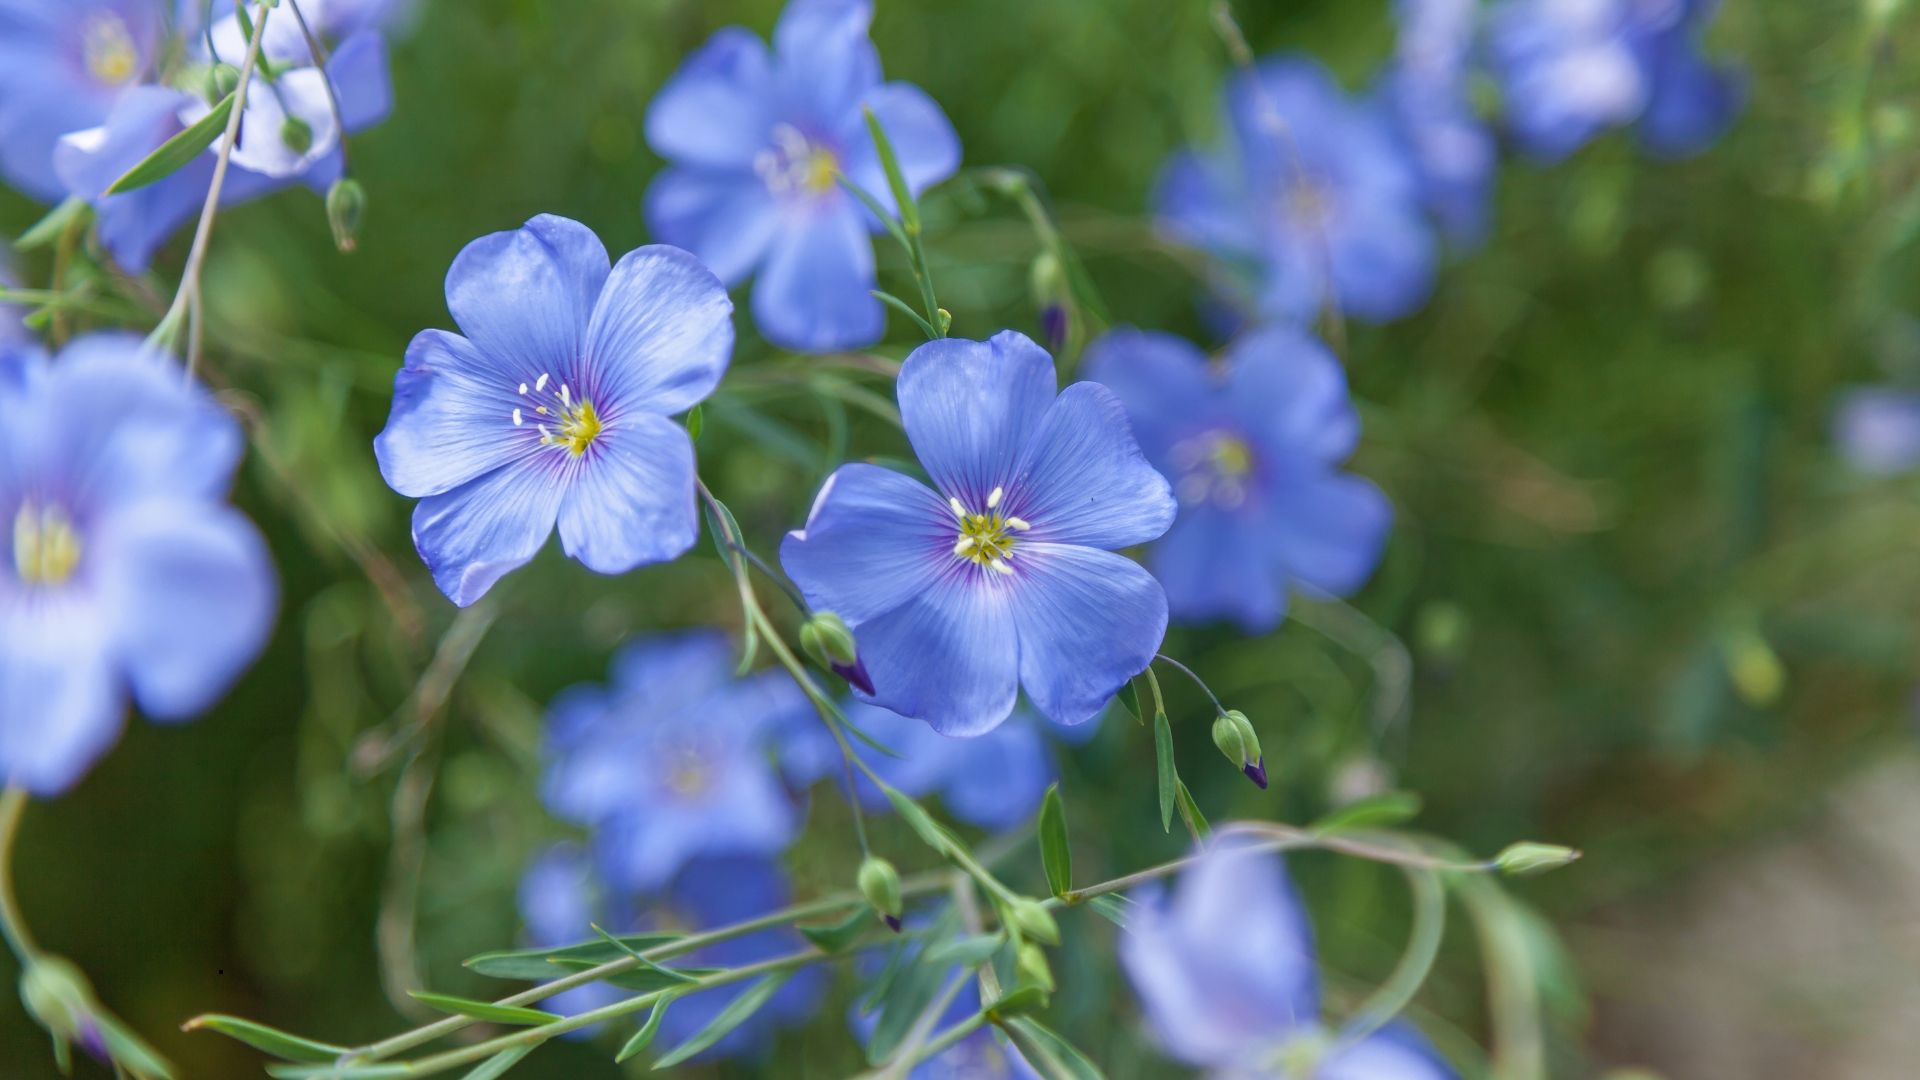 blue flax flowers in the field